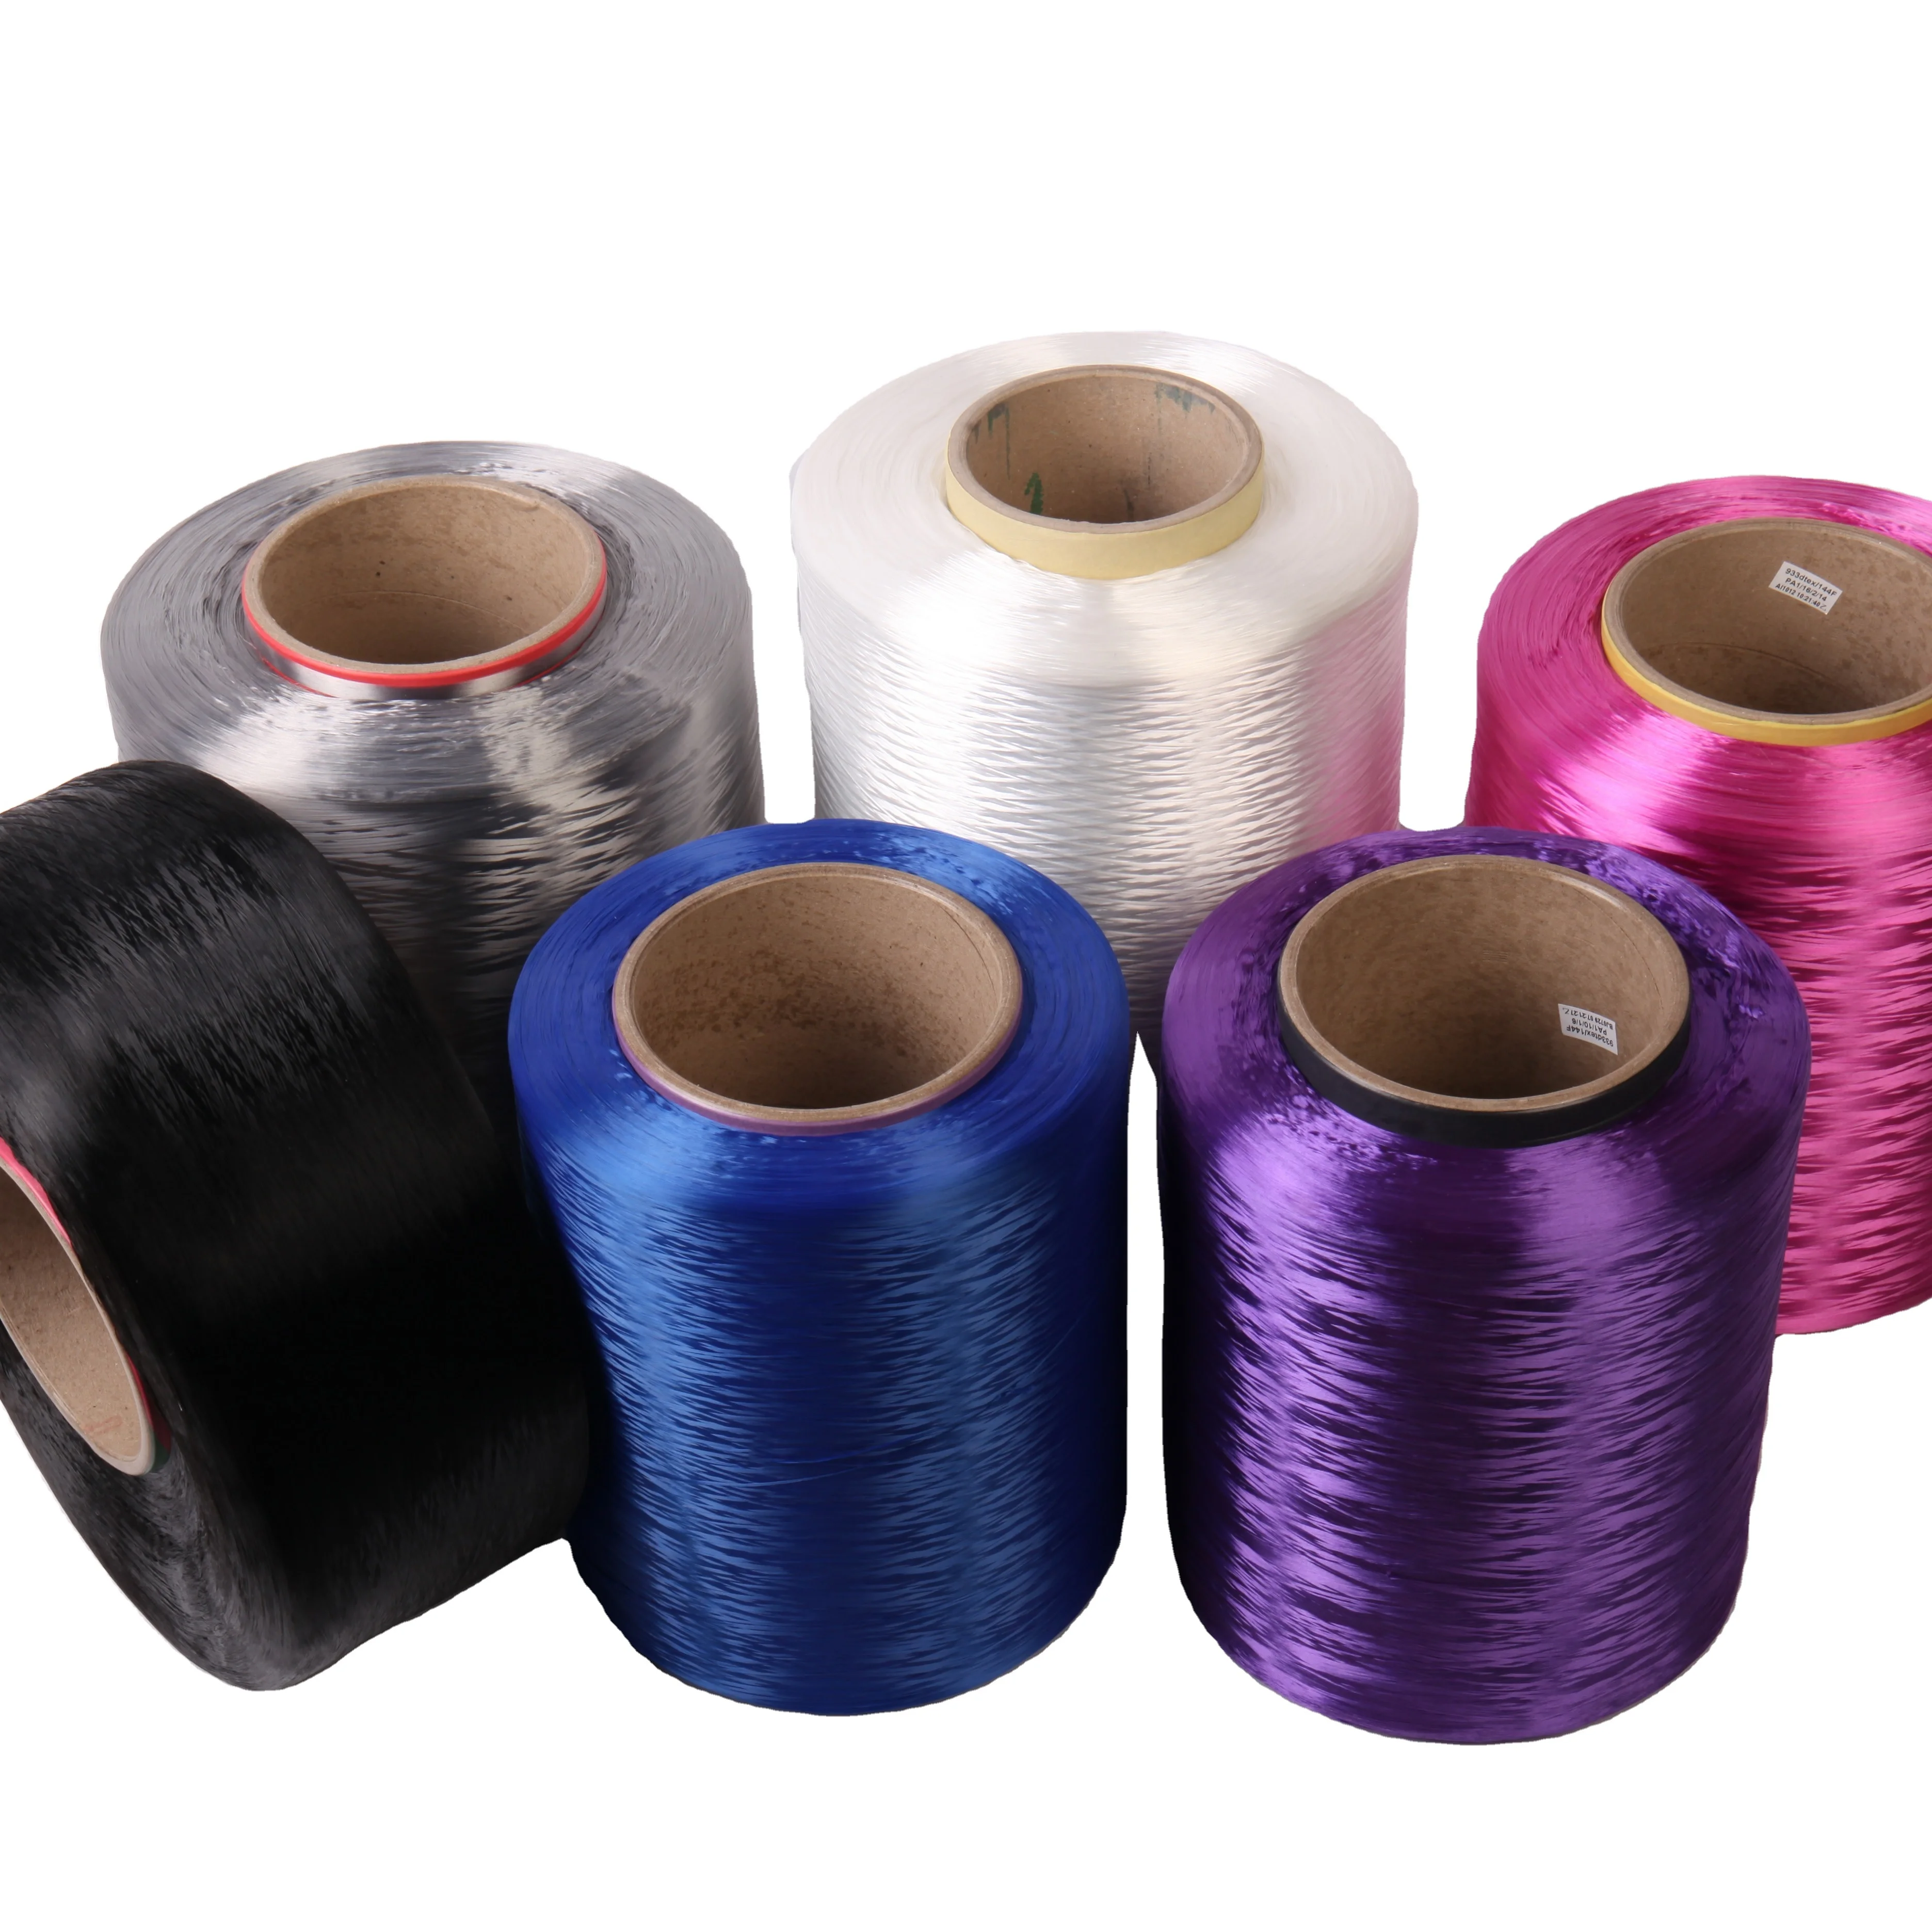 
recycled polyester filament multifilamento fdy yarns 1100 dtex 2200dtex 3300dtex for buy fishing net  (1600120156673)